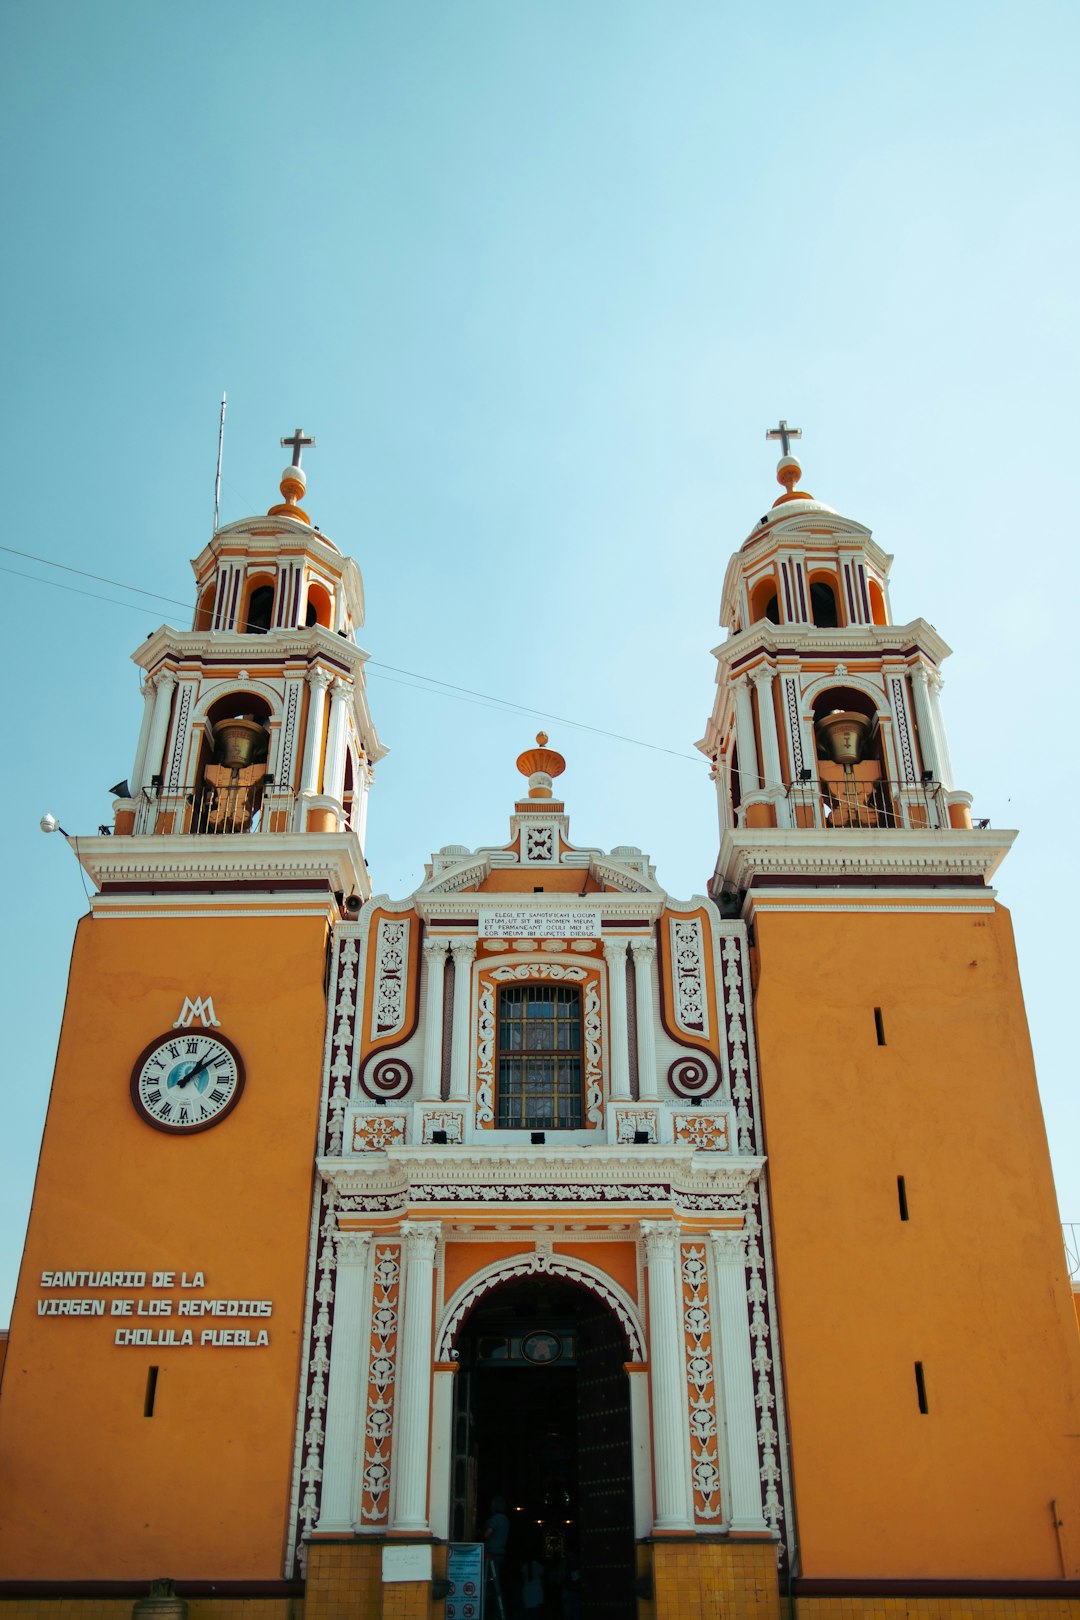 travelers stories about Landmark in Puebla, Mexico